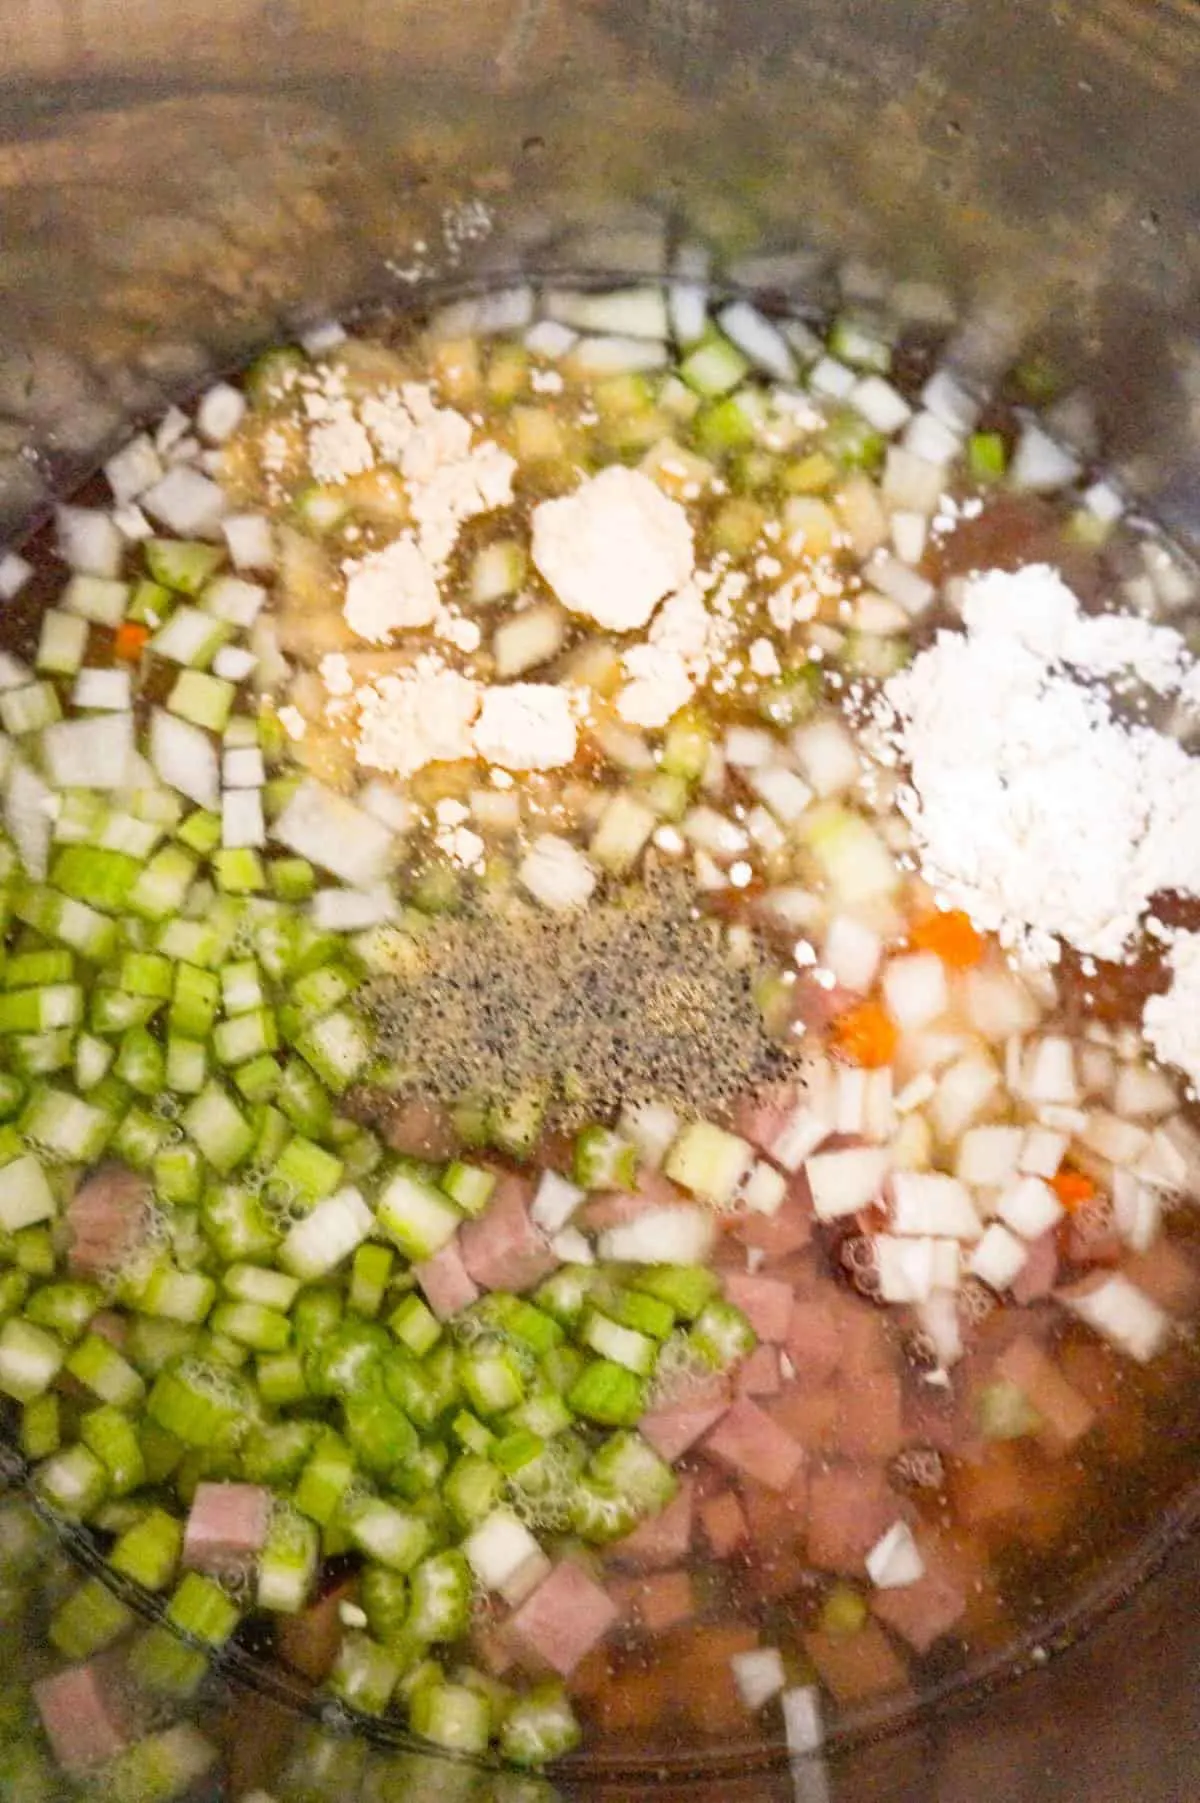 spices on top of diced vegetables and broth in Instant Pot